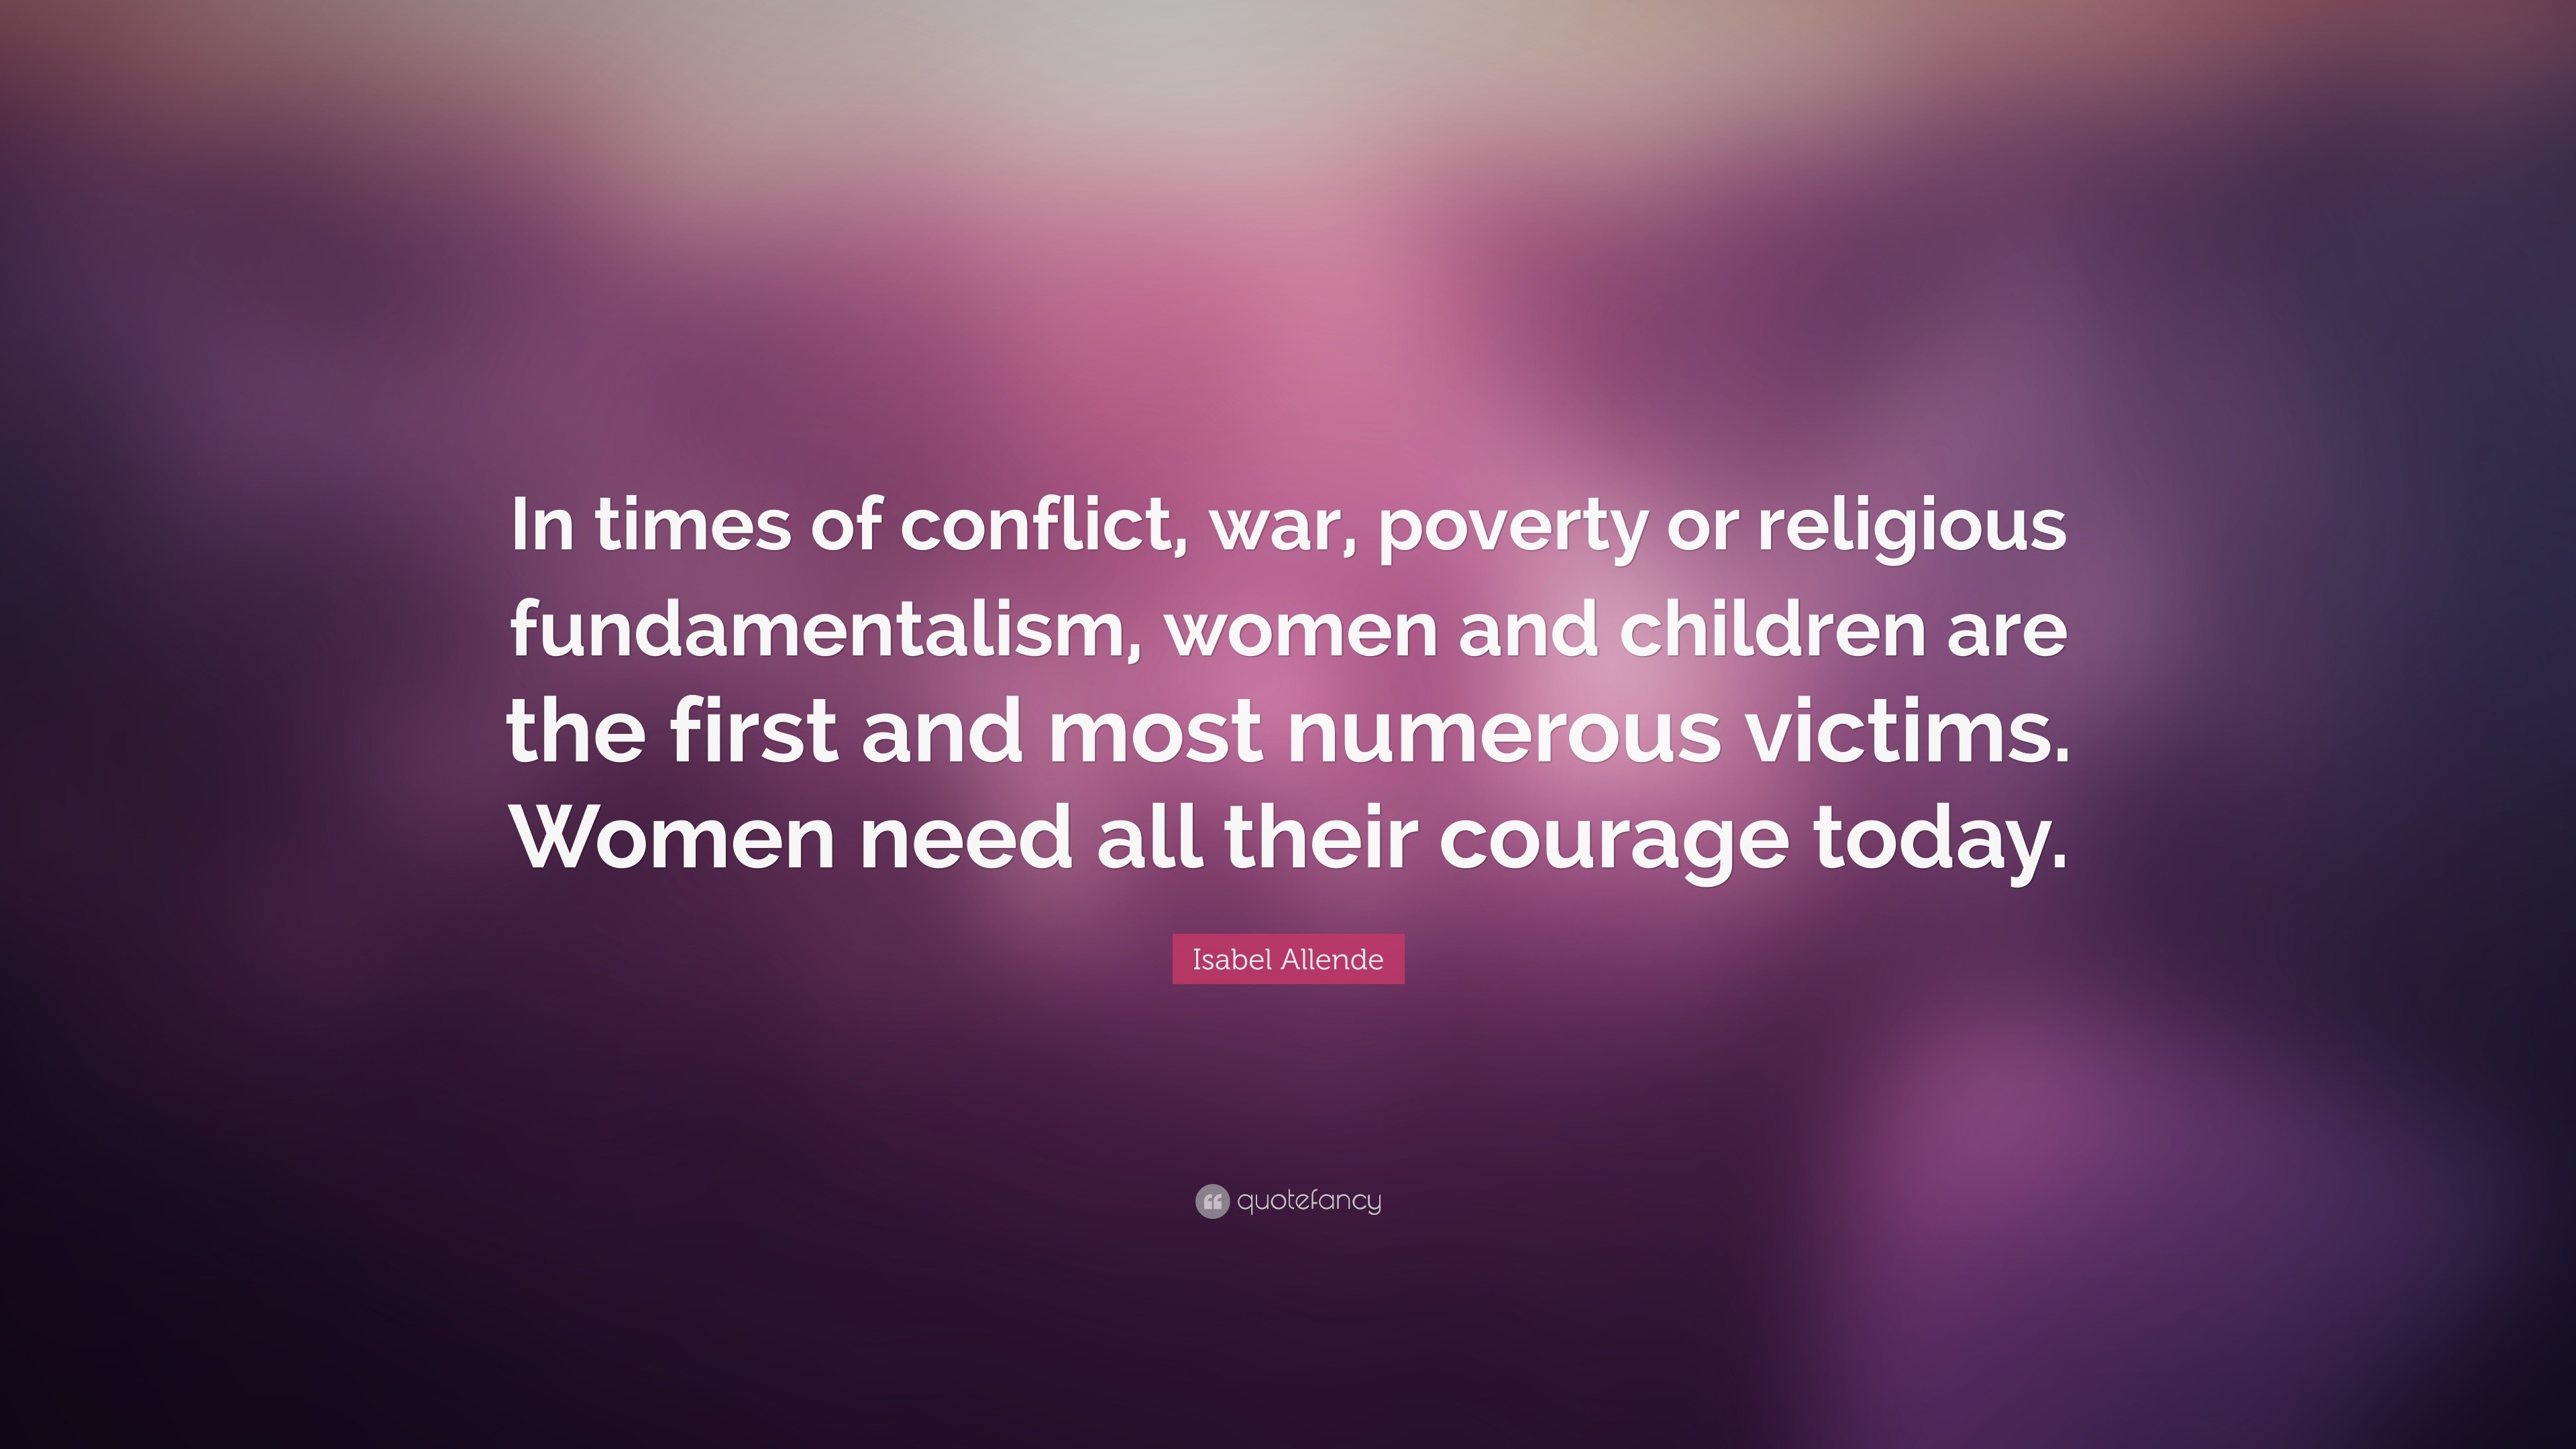 Isabel Allende Quote: “In times of conflict, war, poverty or religious  fundamentalism, women and children are the first and most numerous victi”